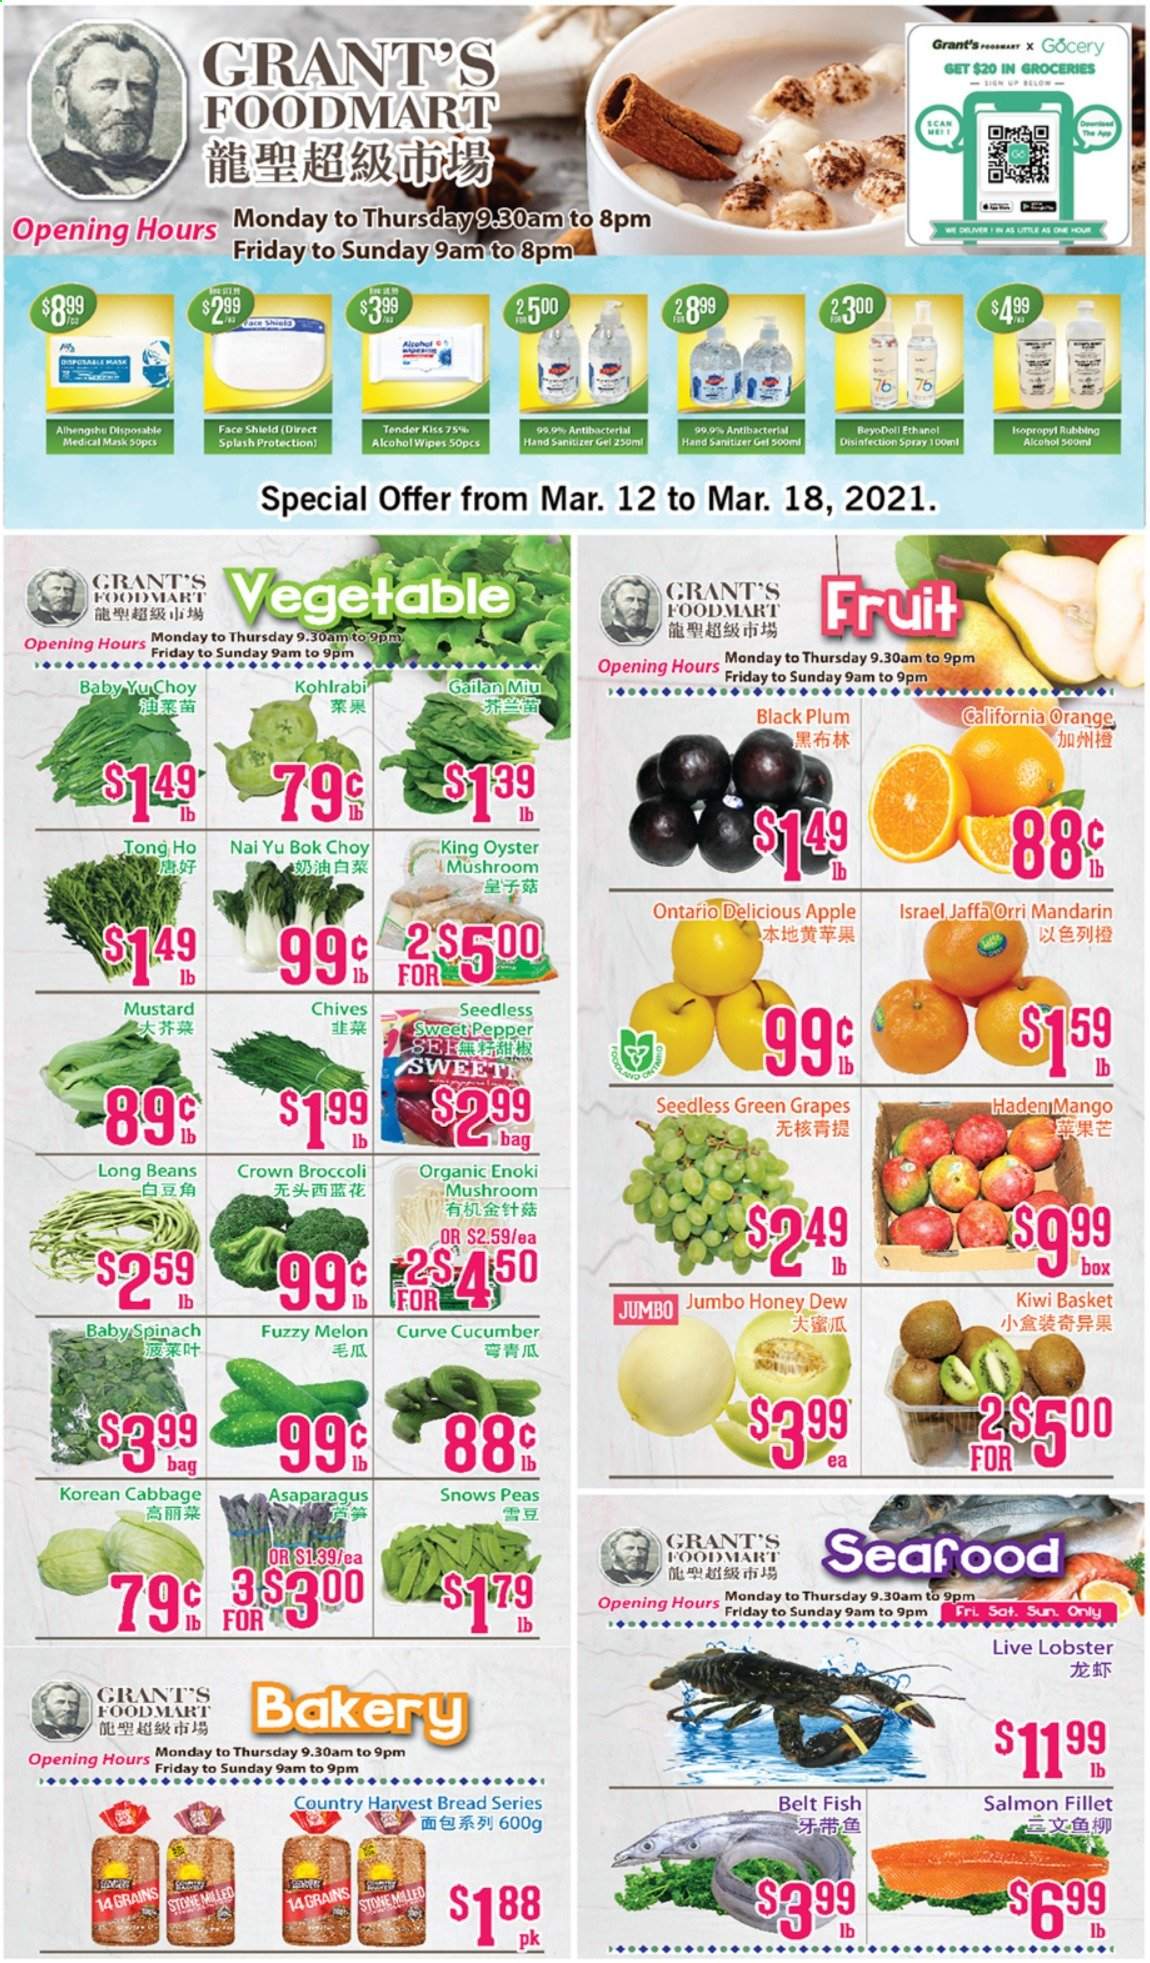 thumbnail - Grant's Foodmart Flyer - March 12, 2021 - March 18, 2021 - Sales products - oyster mushrooms, mushrooms, bread, beans, bok choy, broccoli, cabbage, spinach, peas, chives, grapes, mandarines, melons, black plums, lobster, salmon, salmon fillet, oysters, seafood, fish, Country Harvest, pepper, mustard, Grant's, hand sanitizer, disposable mask, kiwi, kohlrabi. Page 1.